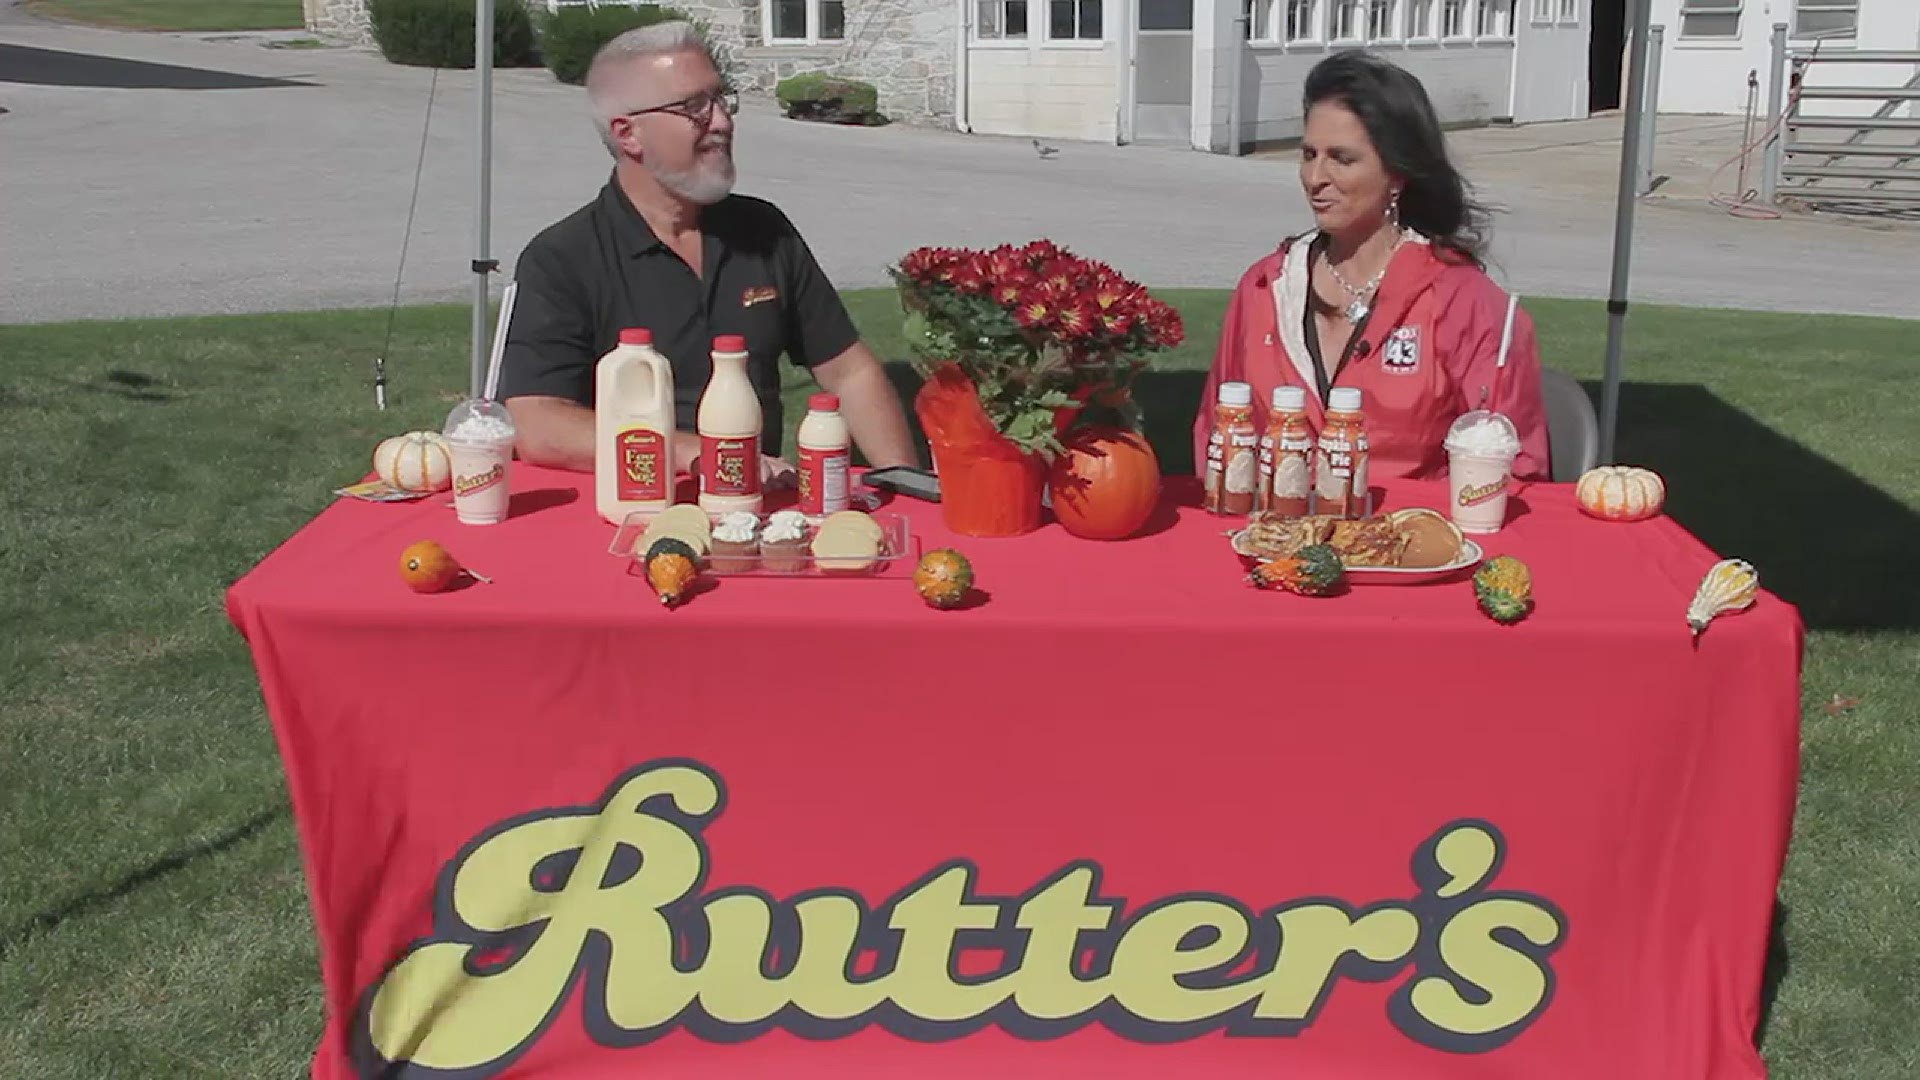 Rick Miller, the Sales and Marketing Manager of Rutter's Dairy, offered more on the seasonal beverages that are available now.